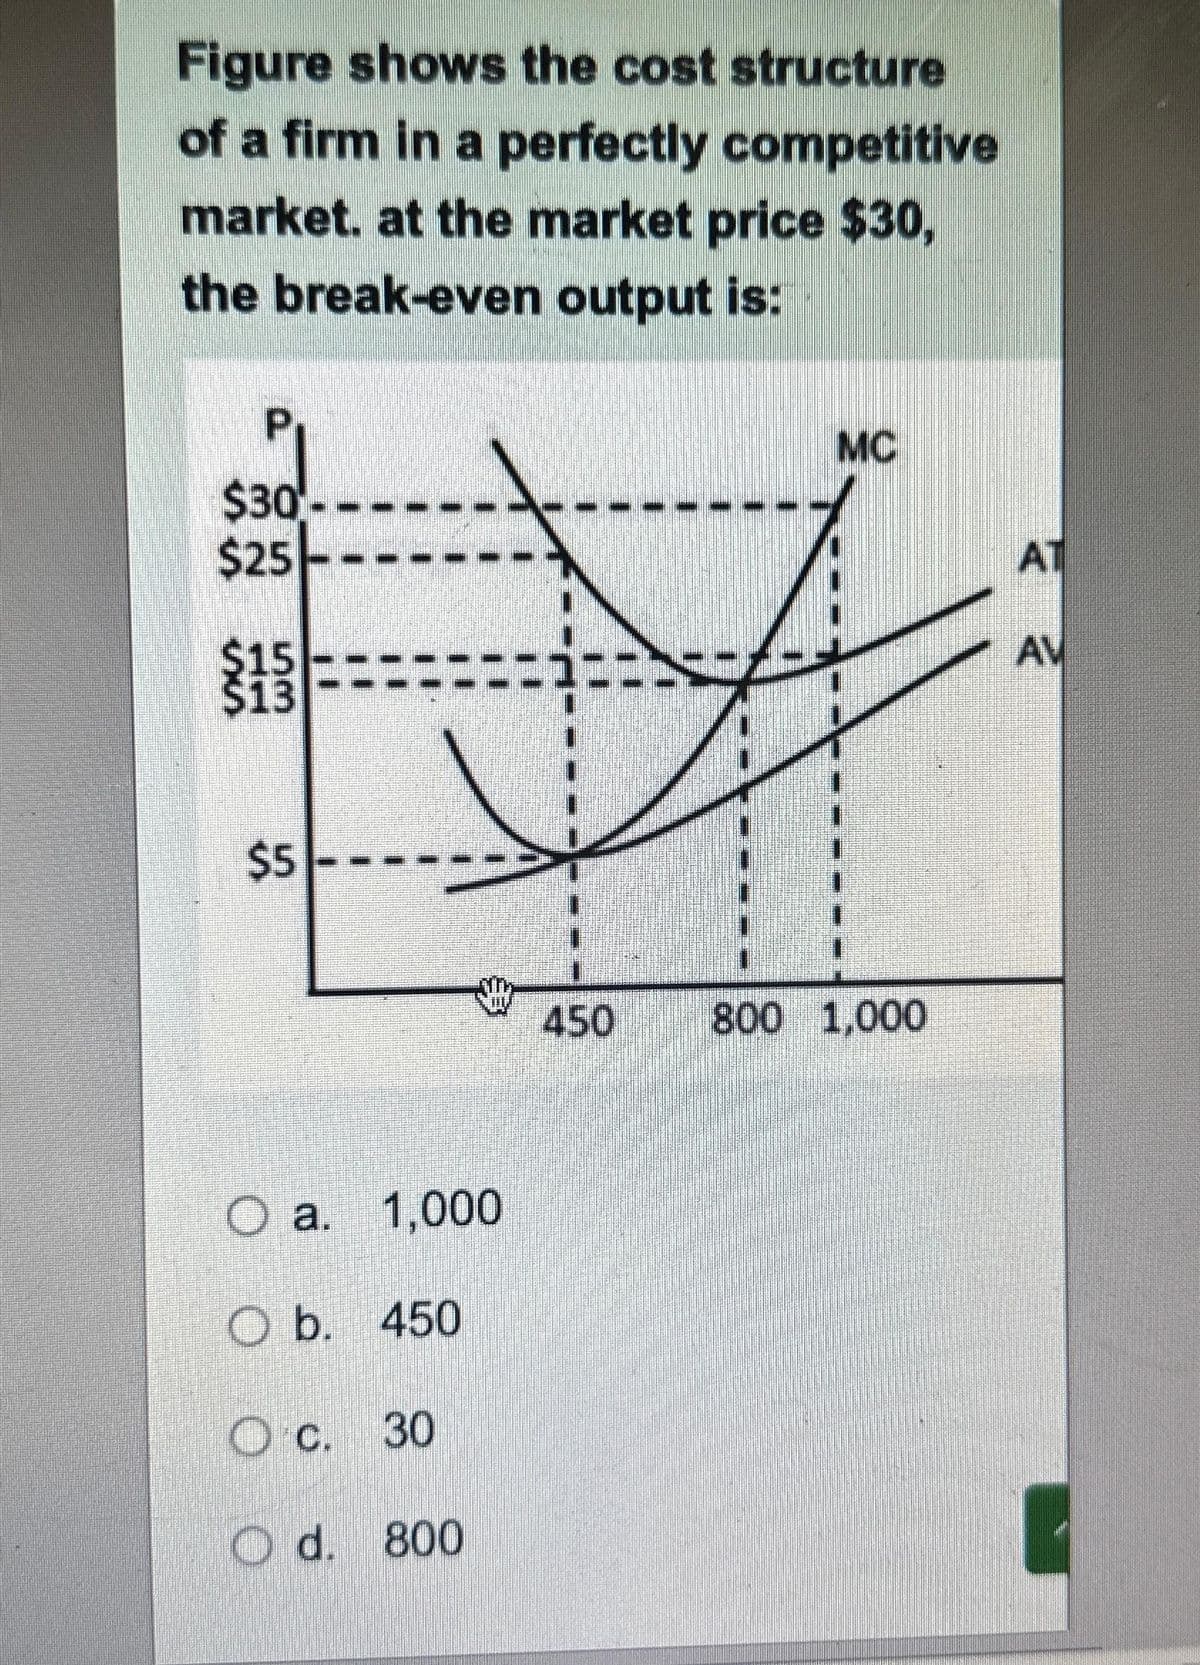 Figure shows the cost structure
of a firm in a perfectly competitive
market. at the market price $30,
the break-even output is:
Р.
$30--
$25
$13
$5
O a. 1,000
O b. 450
O c. 30
O d. 800
450
MC
800 1,000
AT
AV